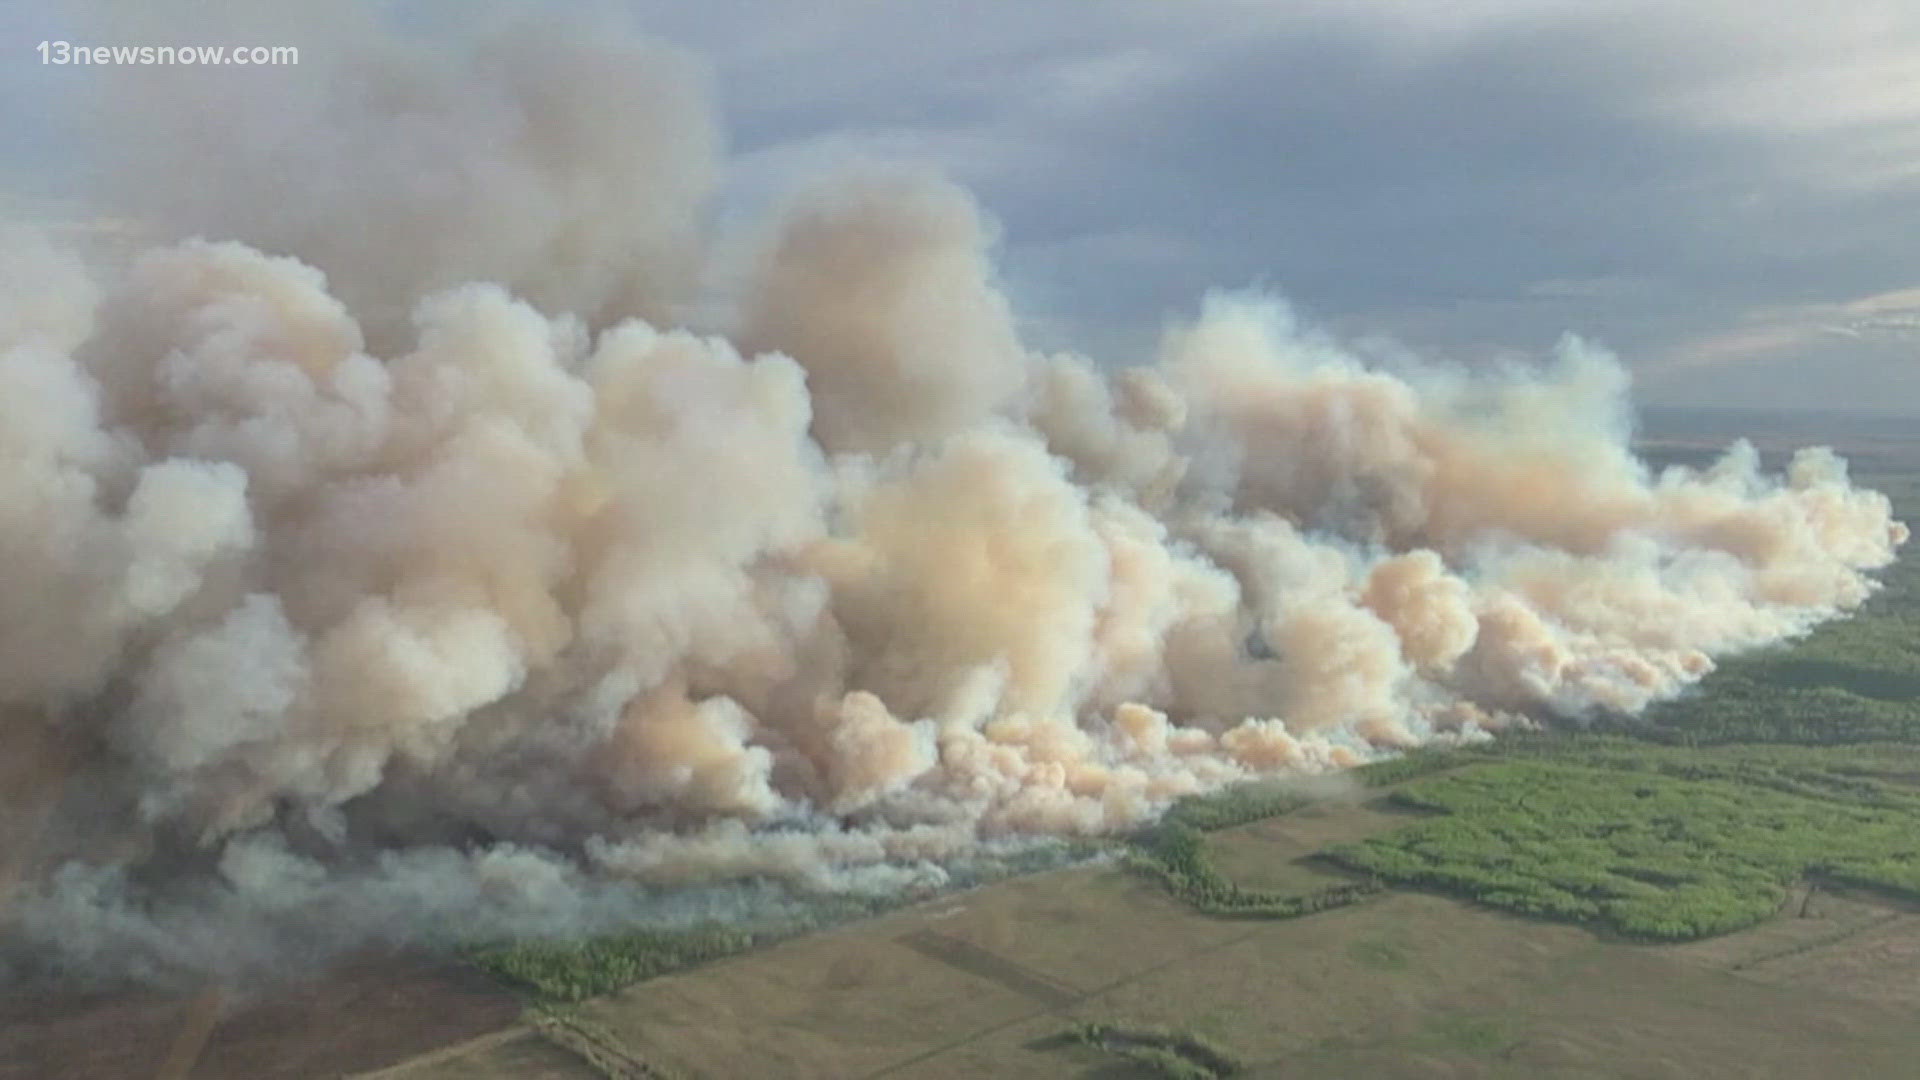 Parts of the United States are seeing the effects of heavy smoke coming from over a hundred Canadian wildfires.